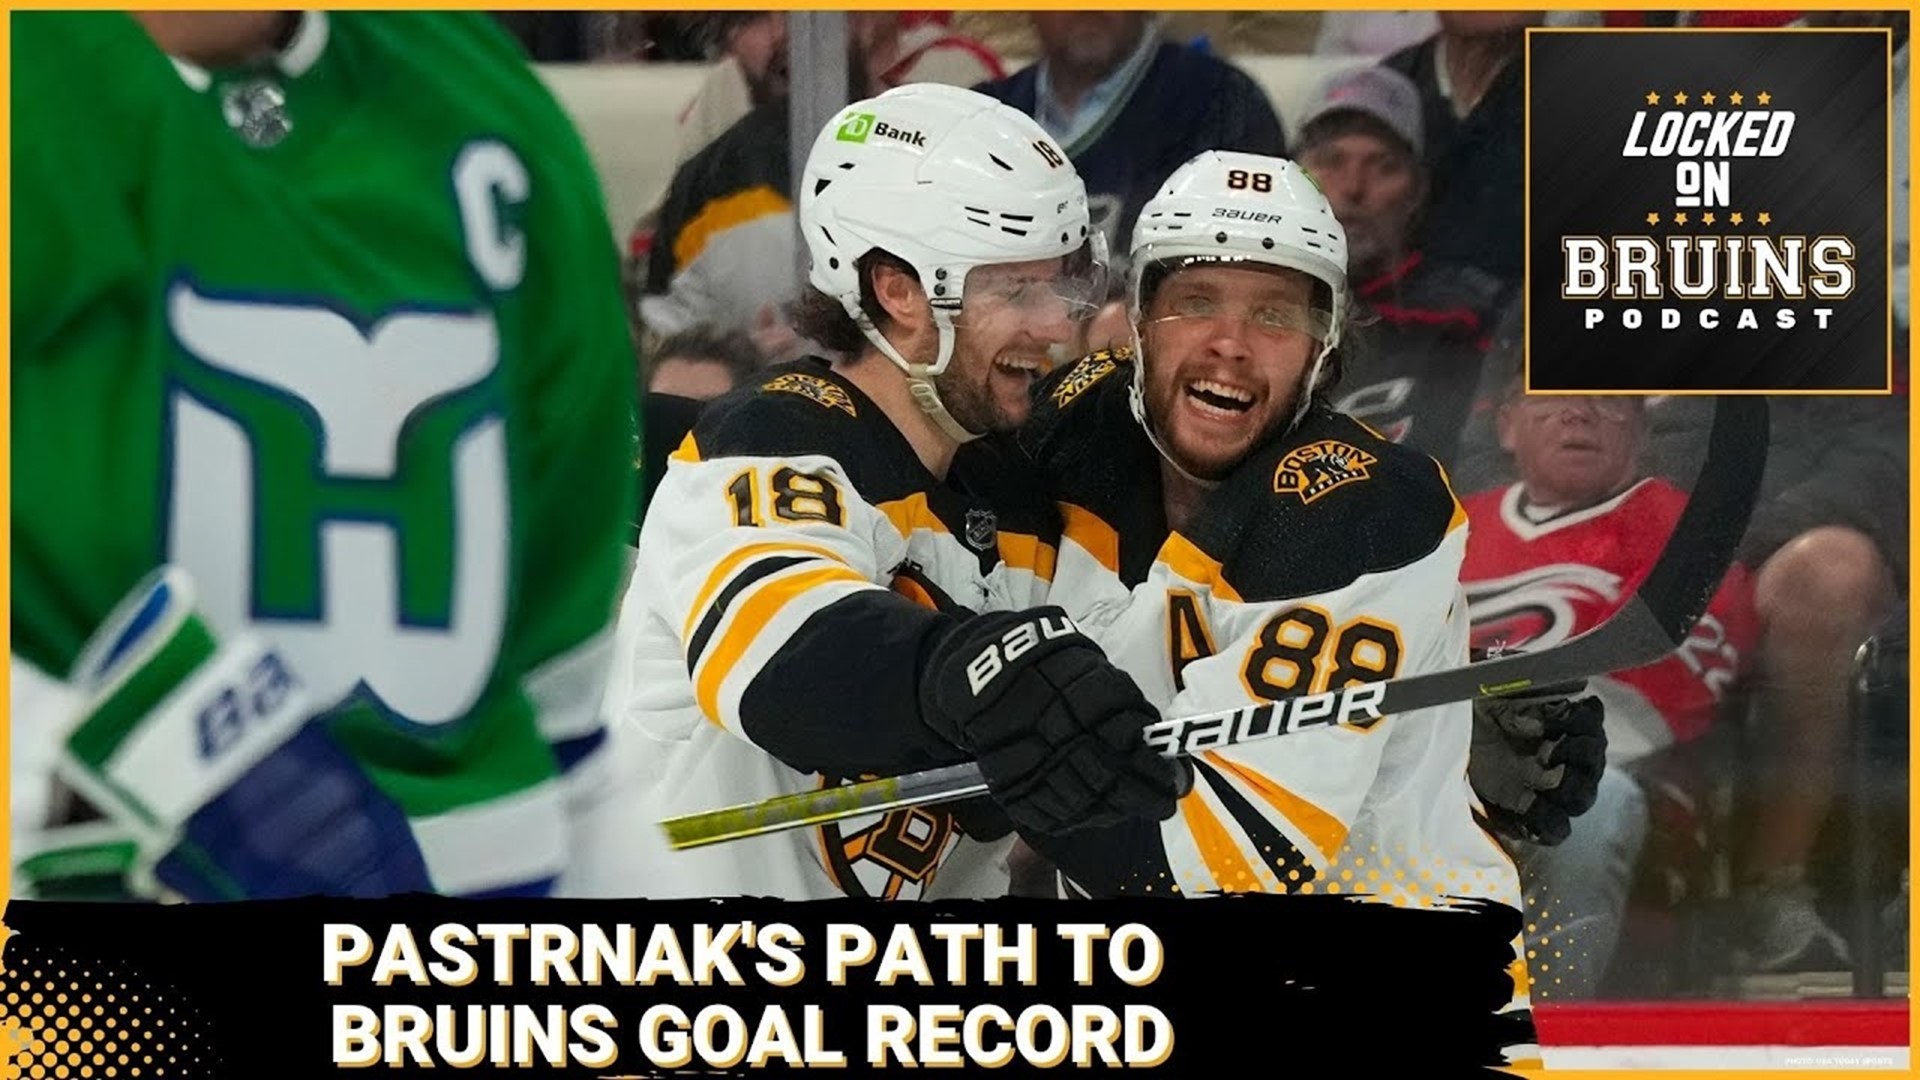 After scoring goals 50 and 51 on the season, David Pastrnak hit a levelo no other Boston Bruins player has reached since Cam Neely in 1993-94.